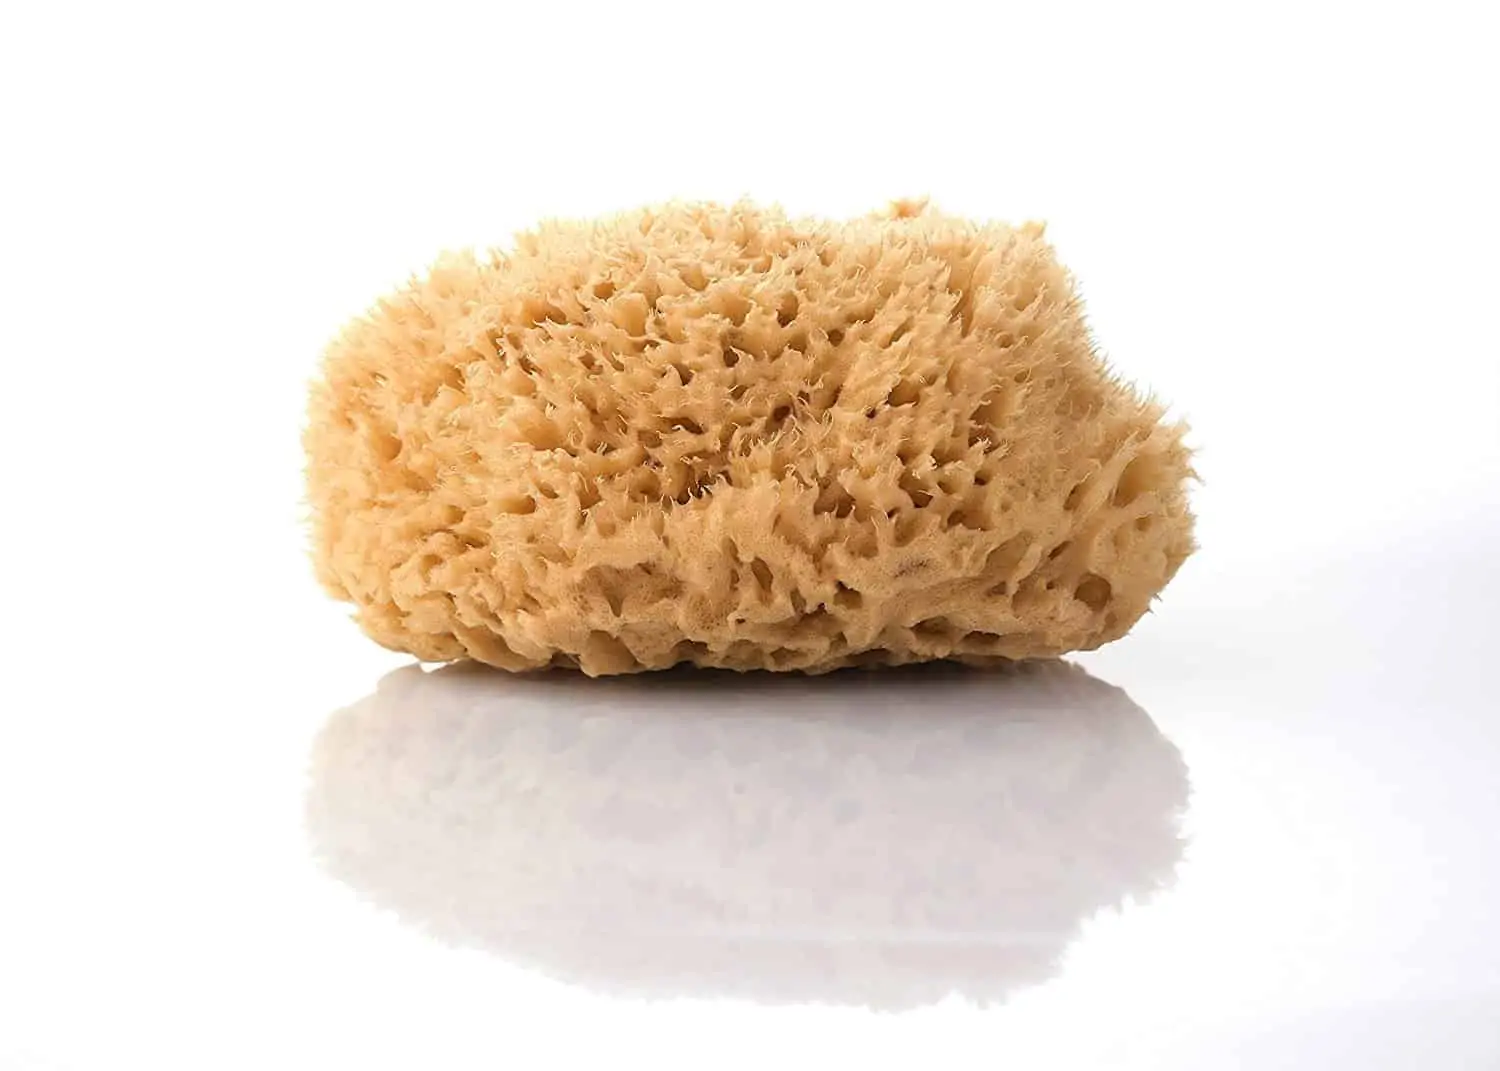 Monthly hygiene without plastic - sponges